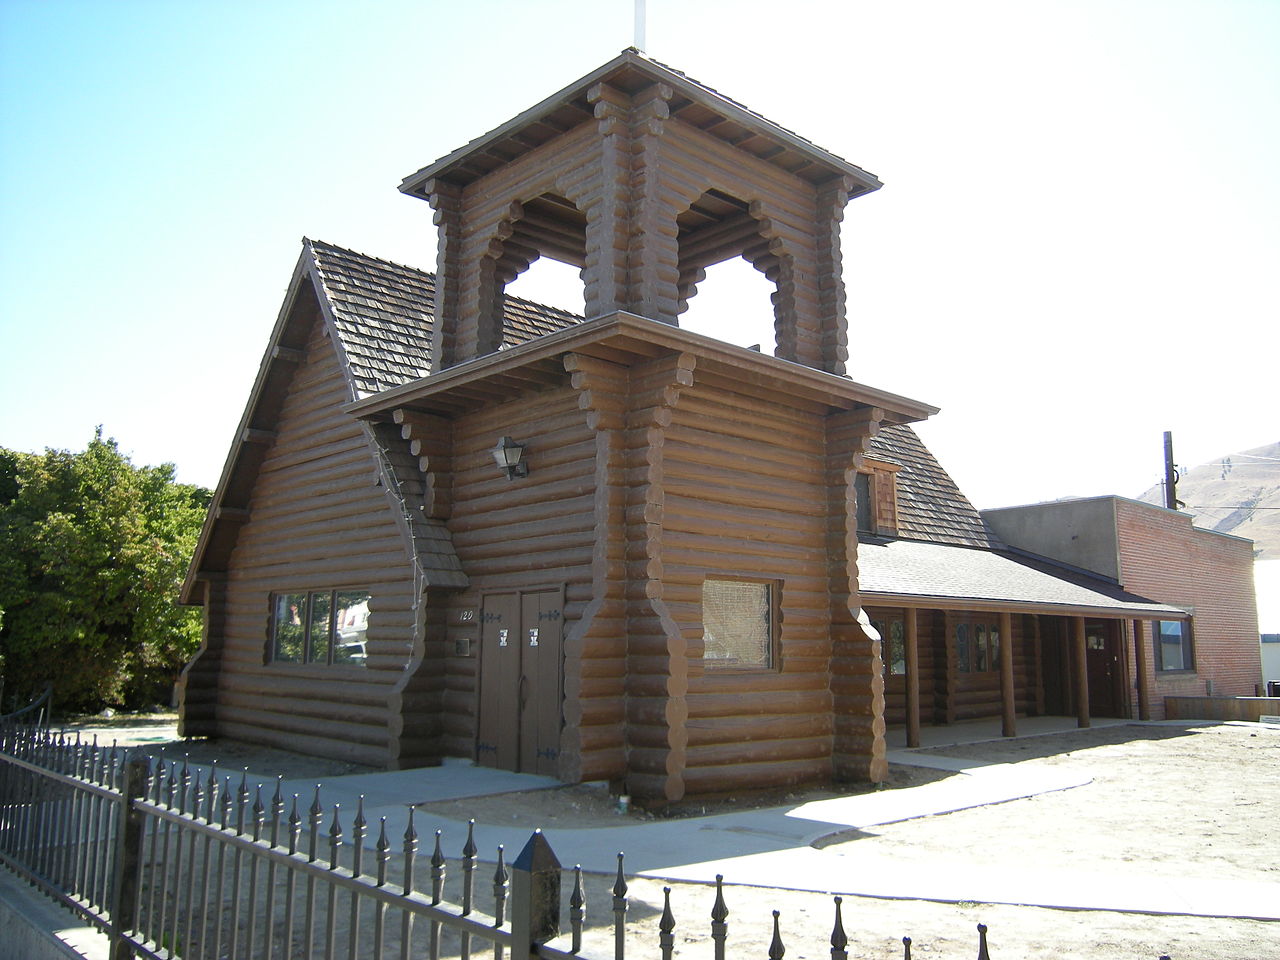 Built in 1898, St. Andrew's Episcopal Church is believed to be the oldest log church in the state still used by the same congregation.